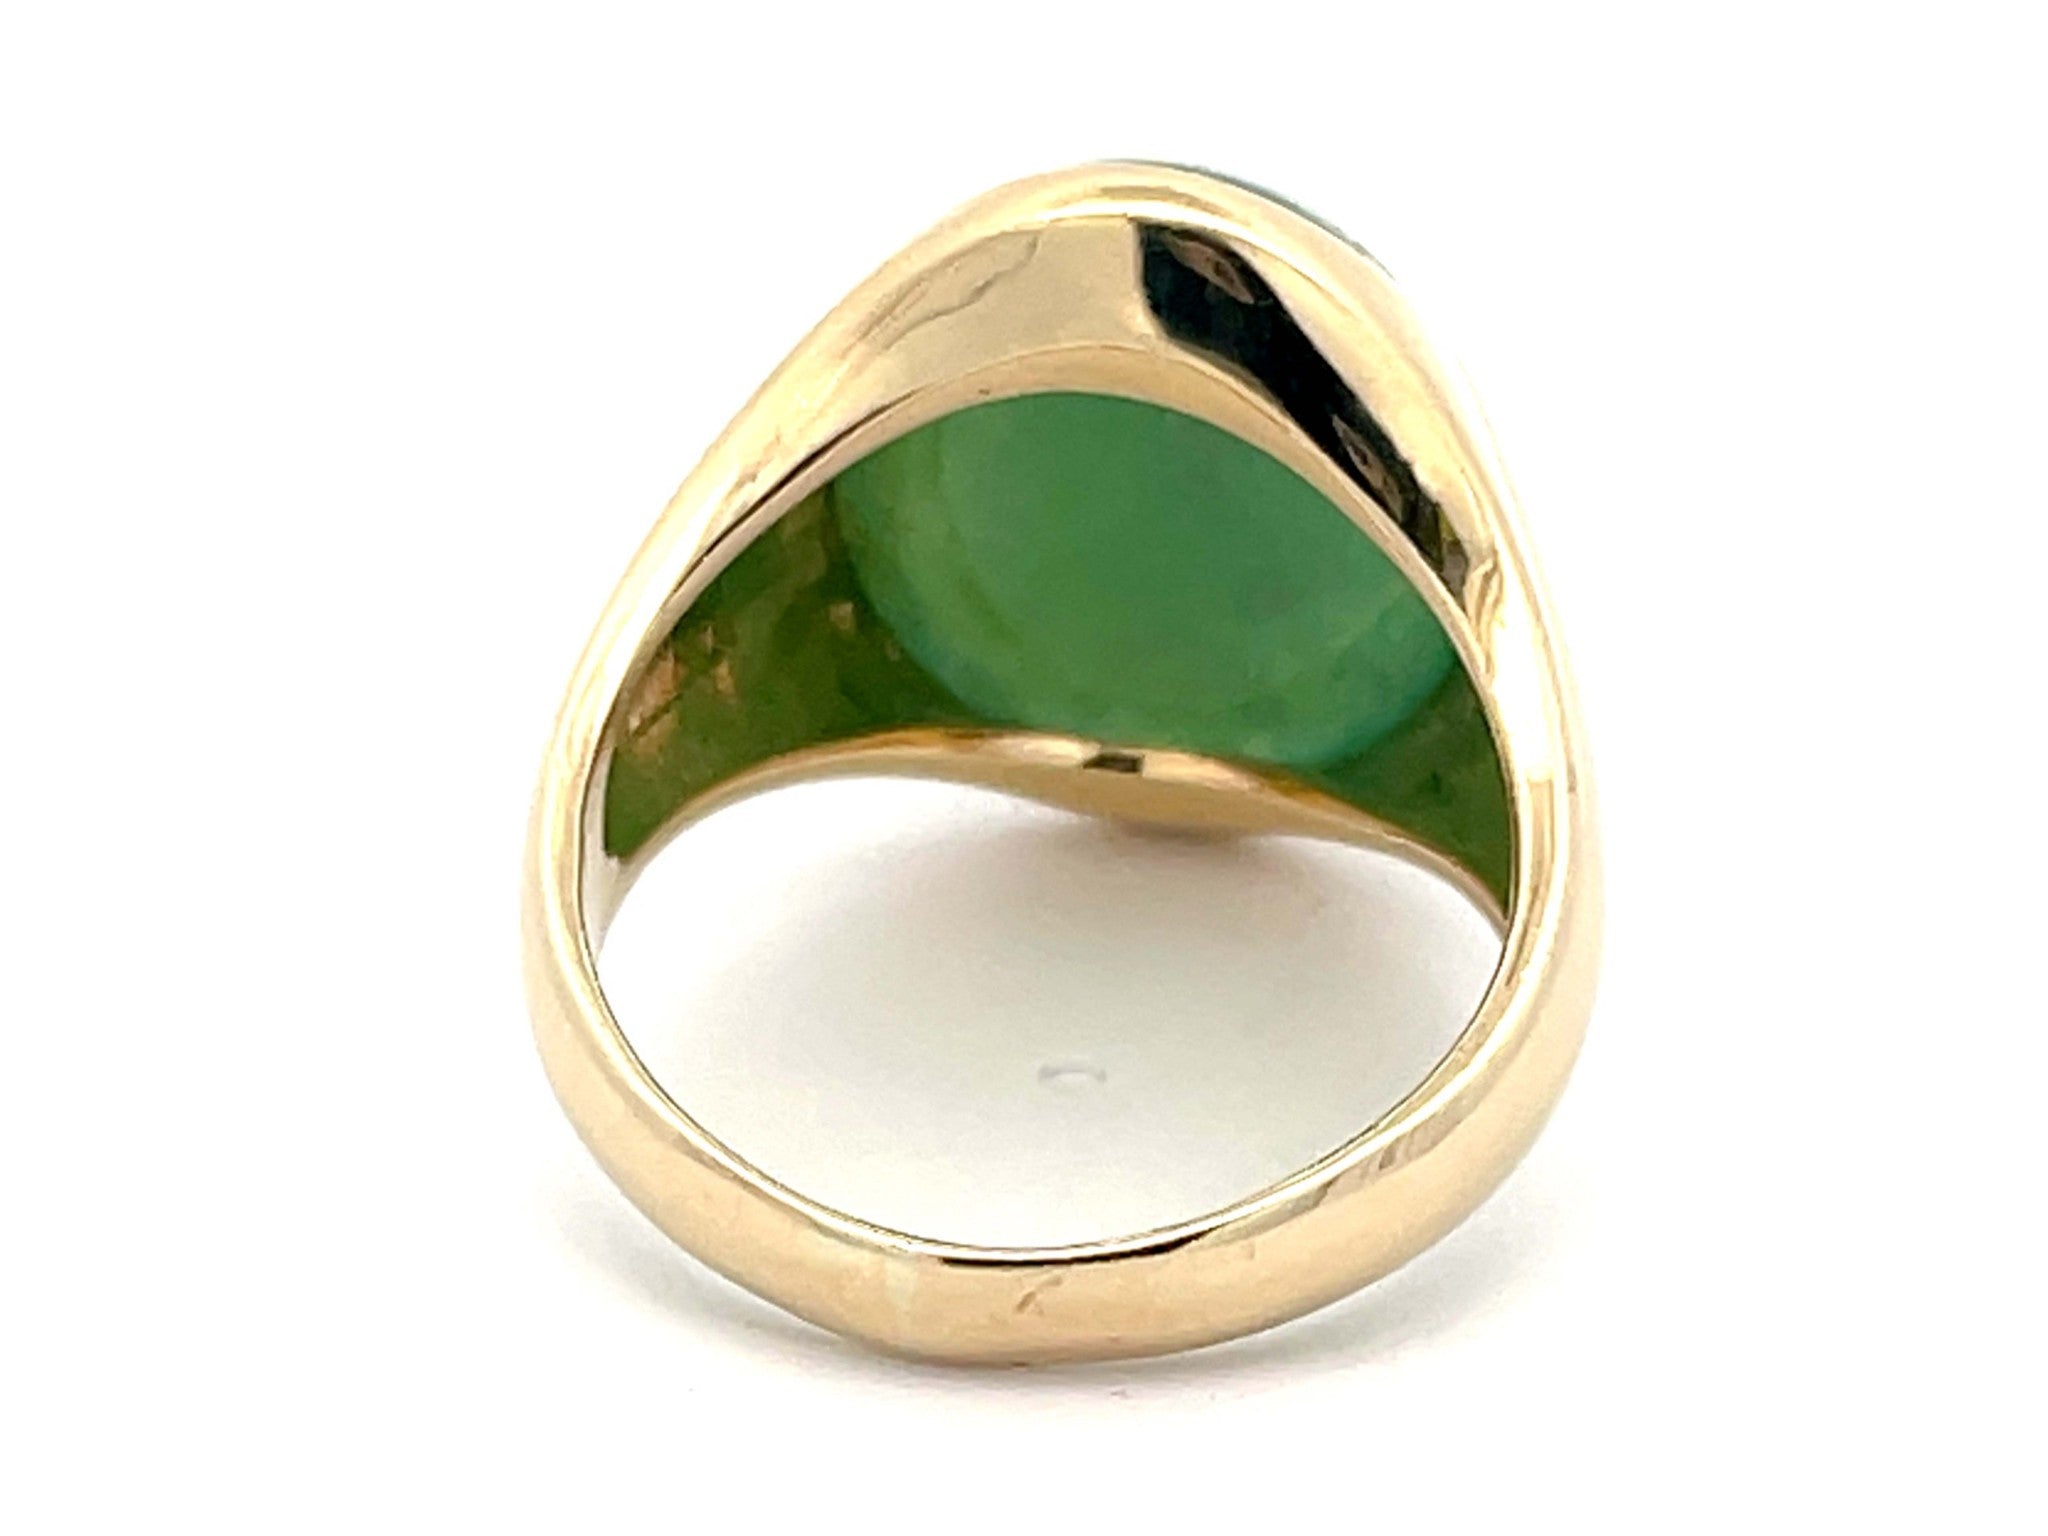 21 Carat Oval Cabochon Green Jade Ring in 14K Yellow Gold